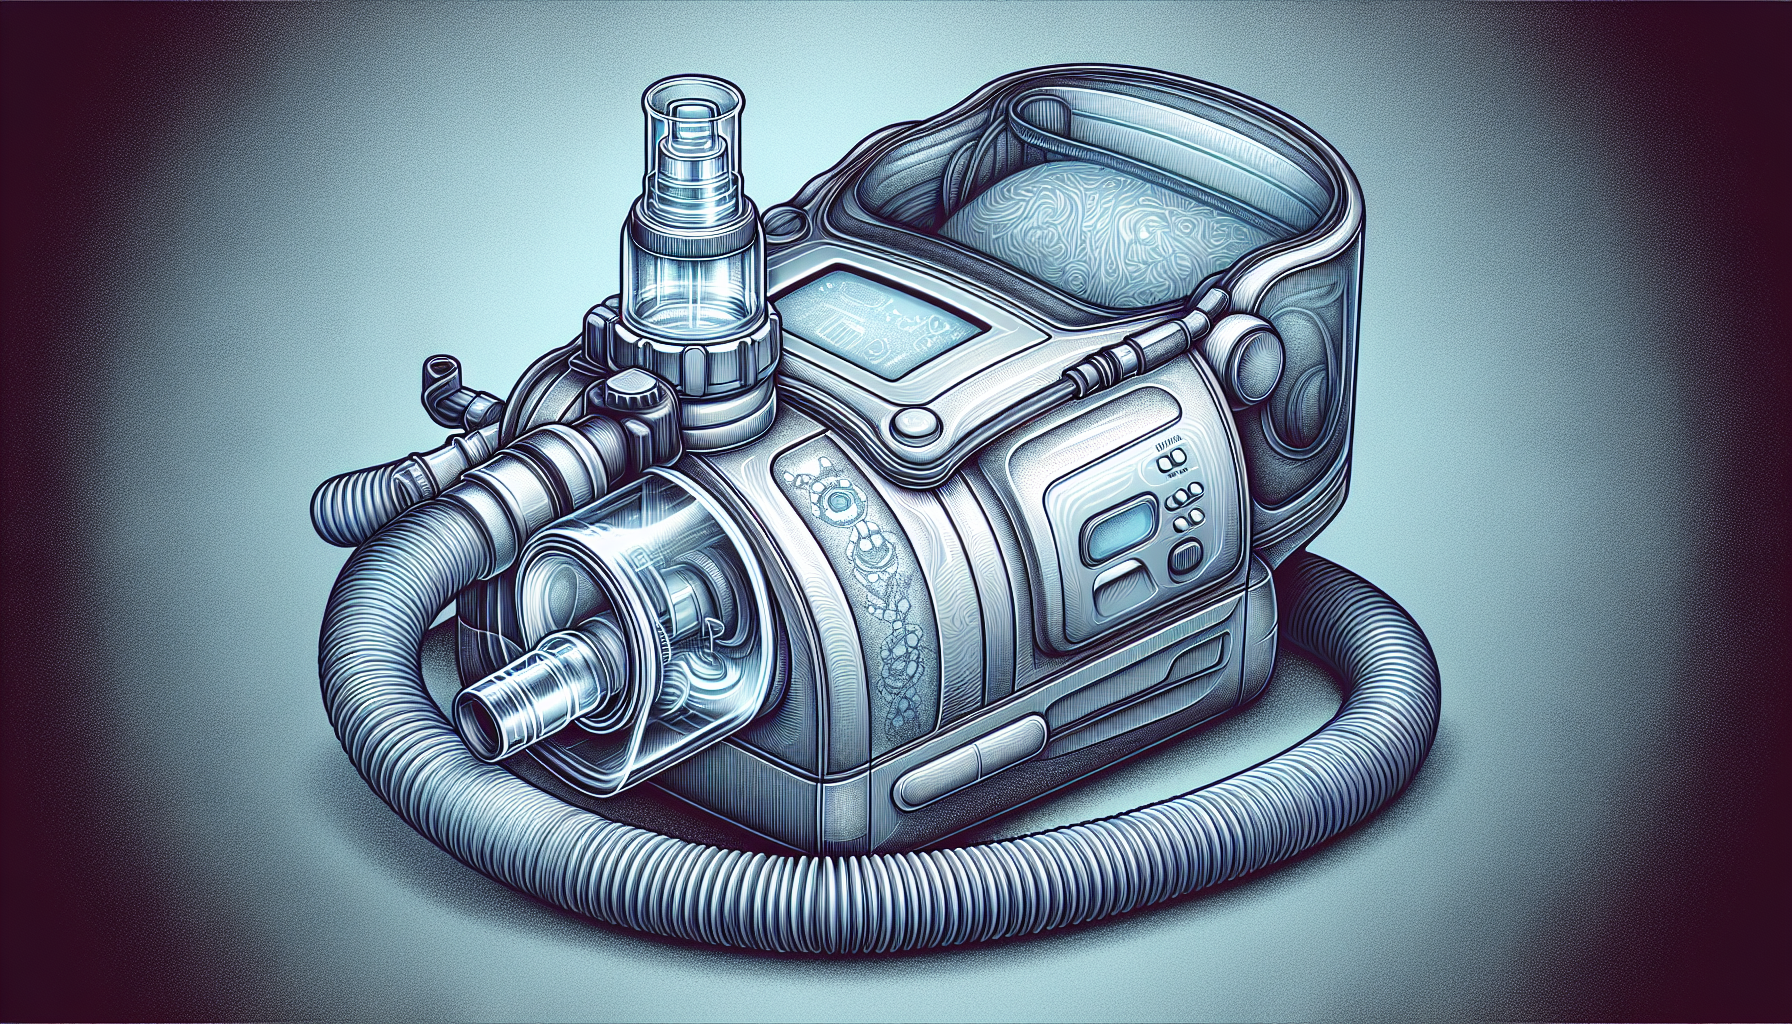 Illustration of a CPAP machine with blurred brand name